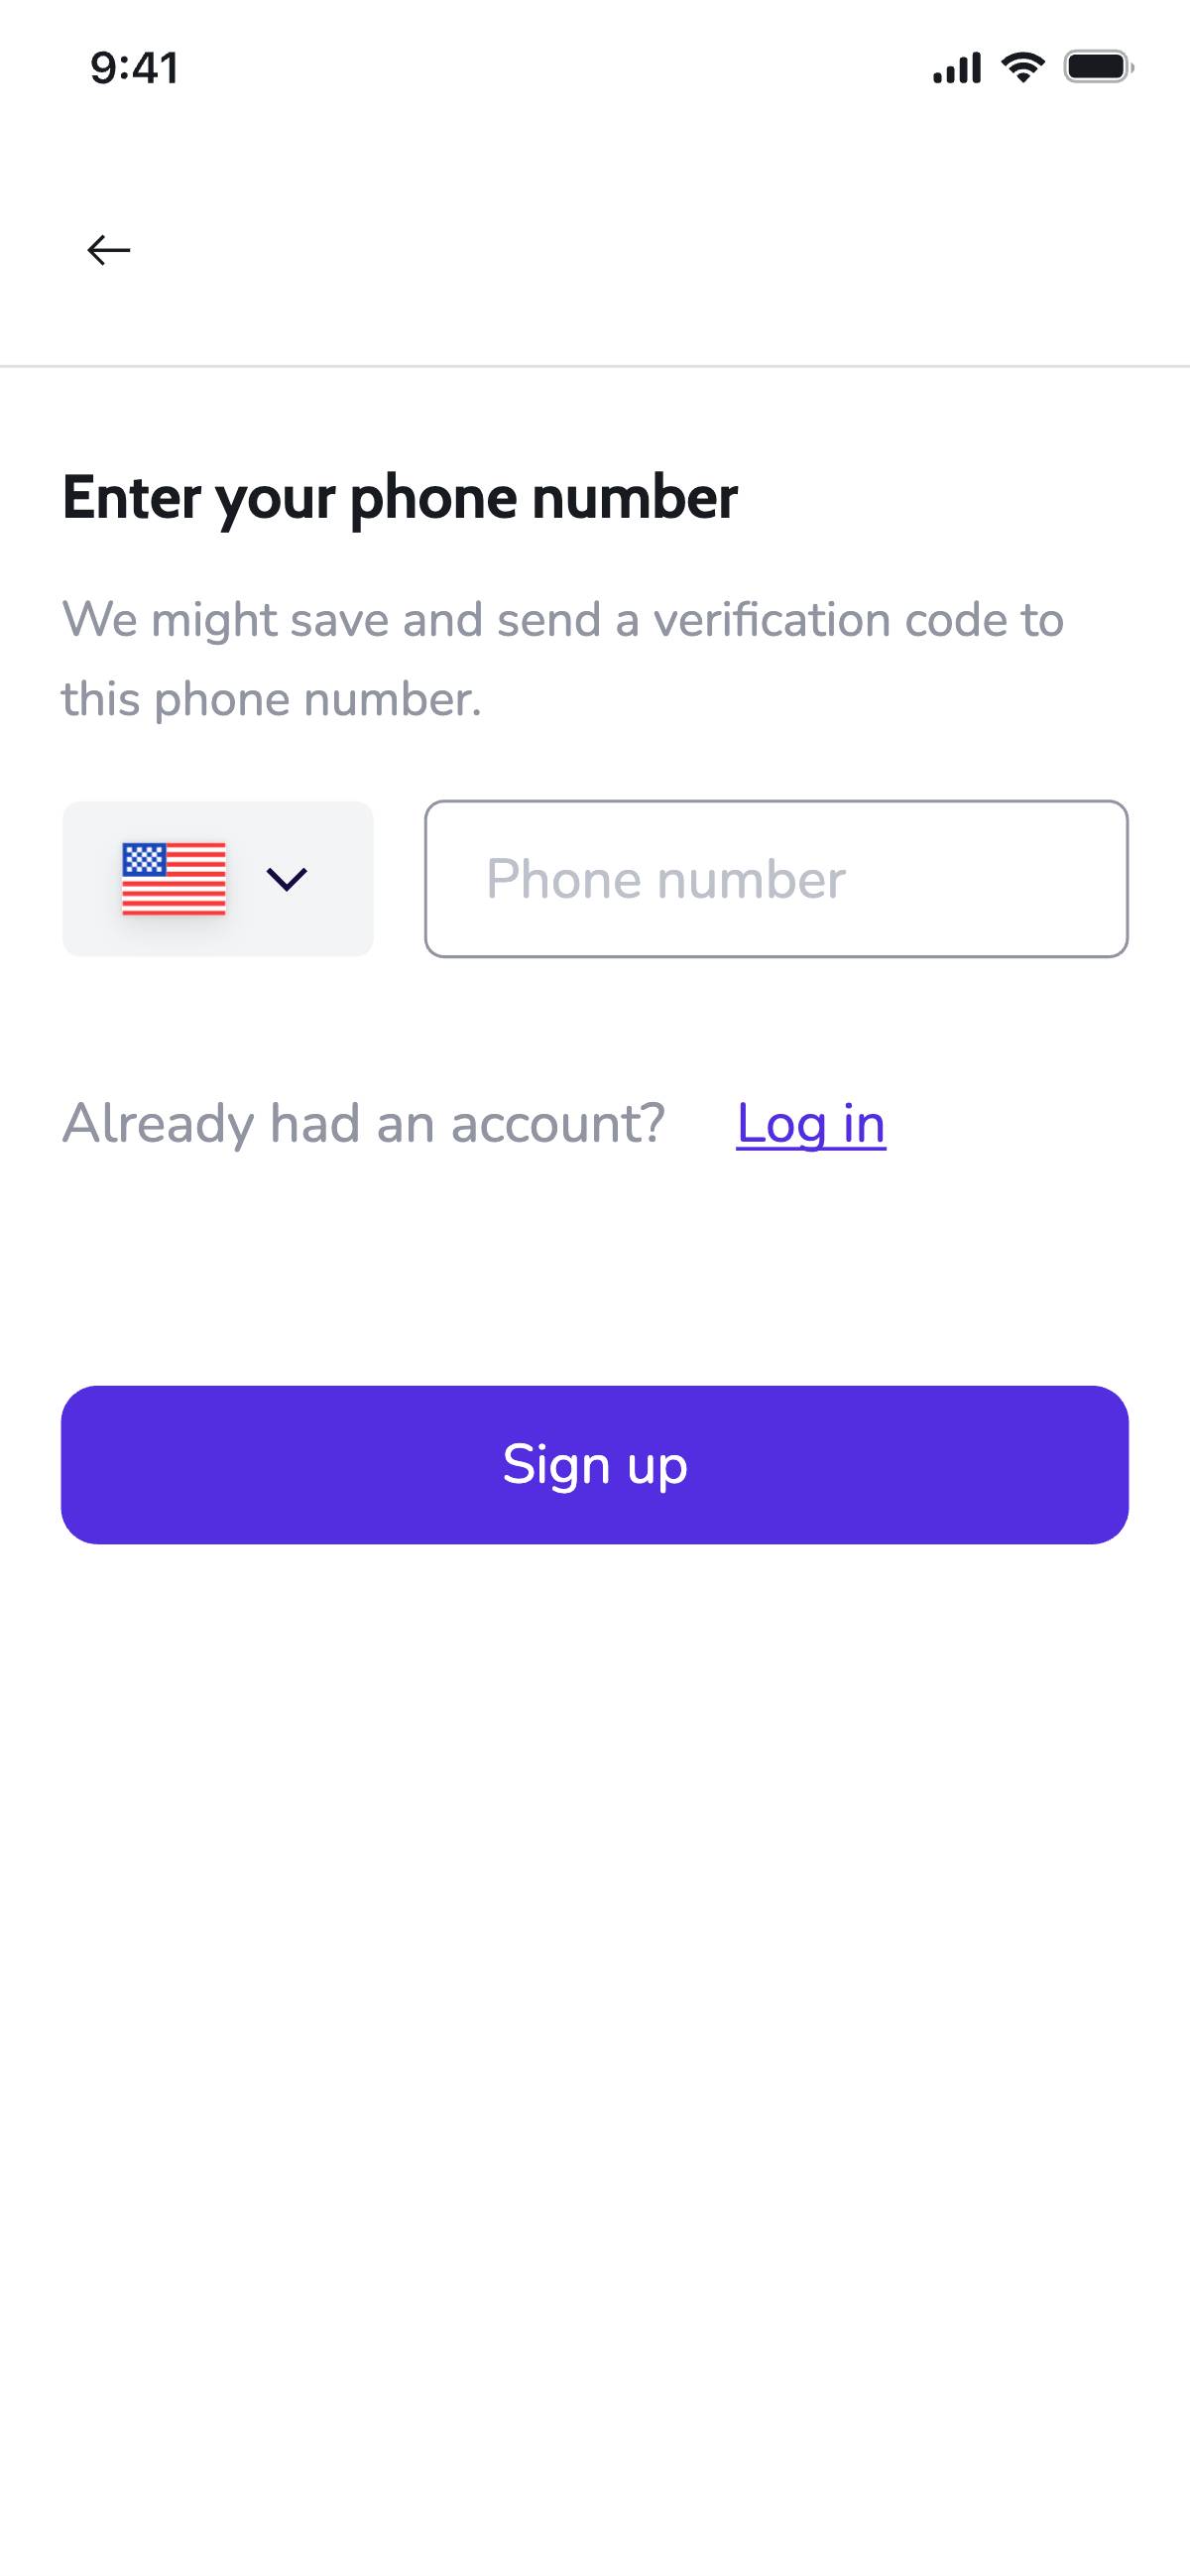 Sign up - Input phone number